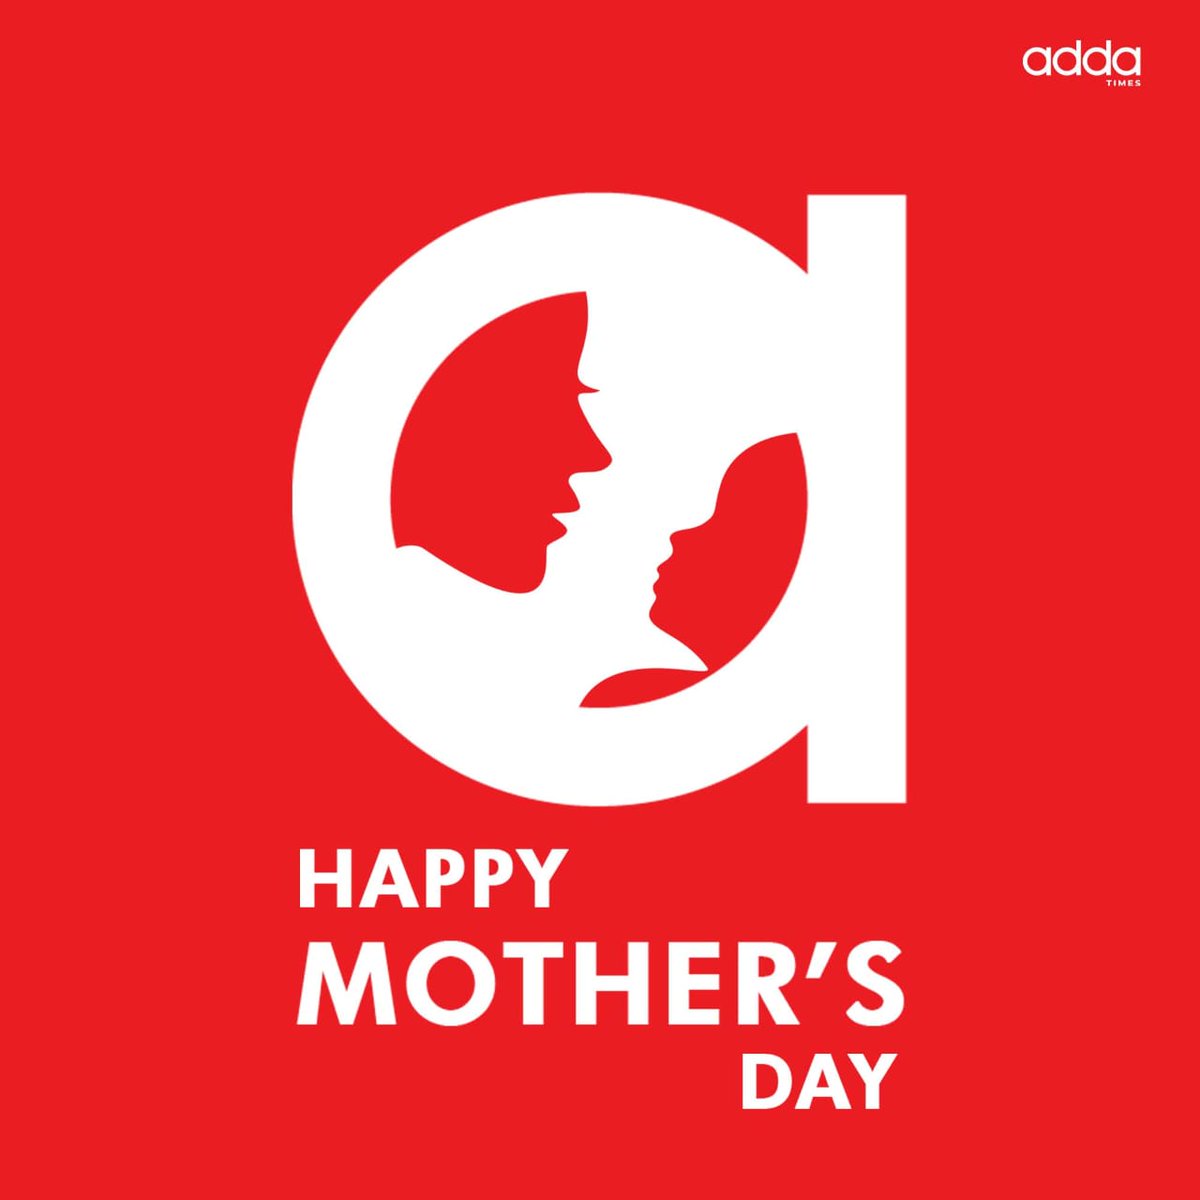 Happy Mother’s Day to all the woman who deserves all the love and appreciation in the world... #InternationalMothersDay #HappyMothersDay #MothersDay #Addatimes